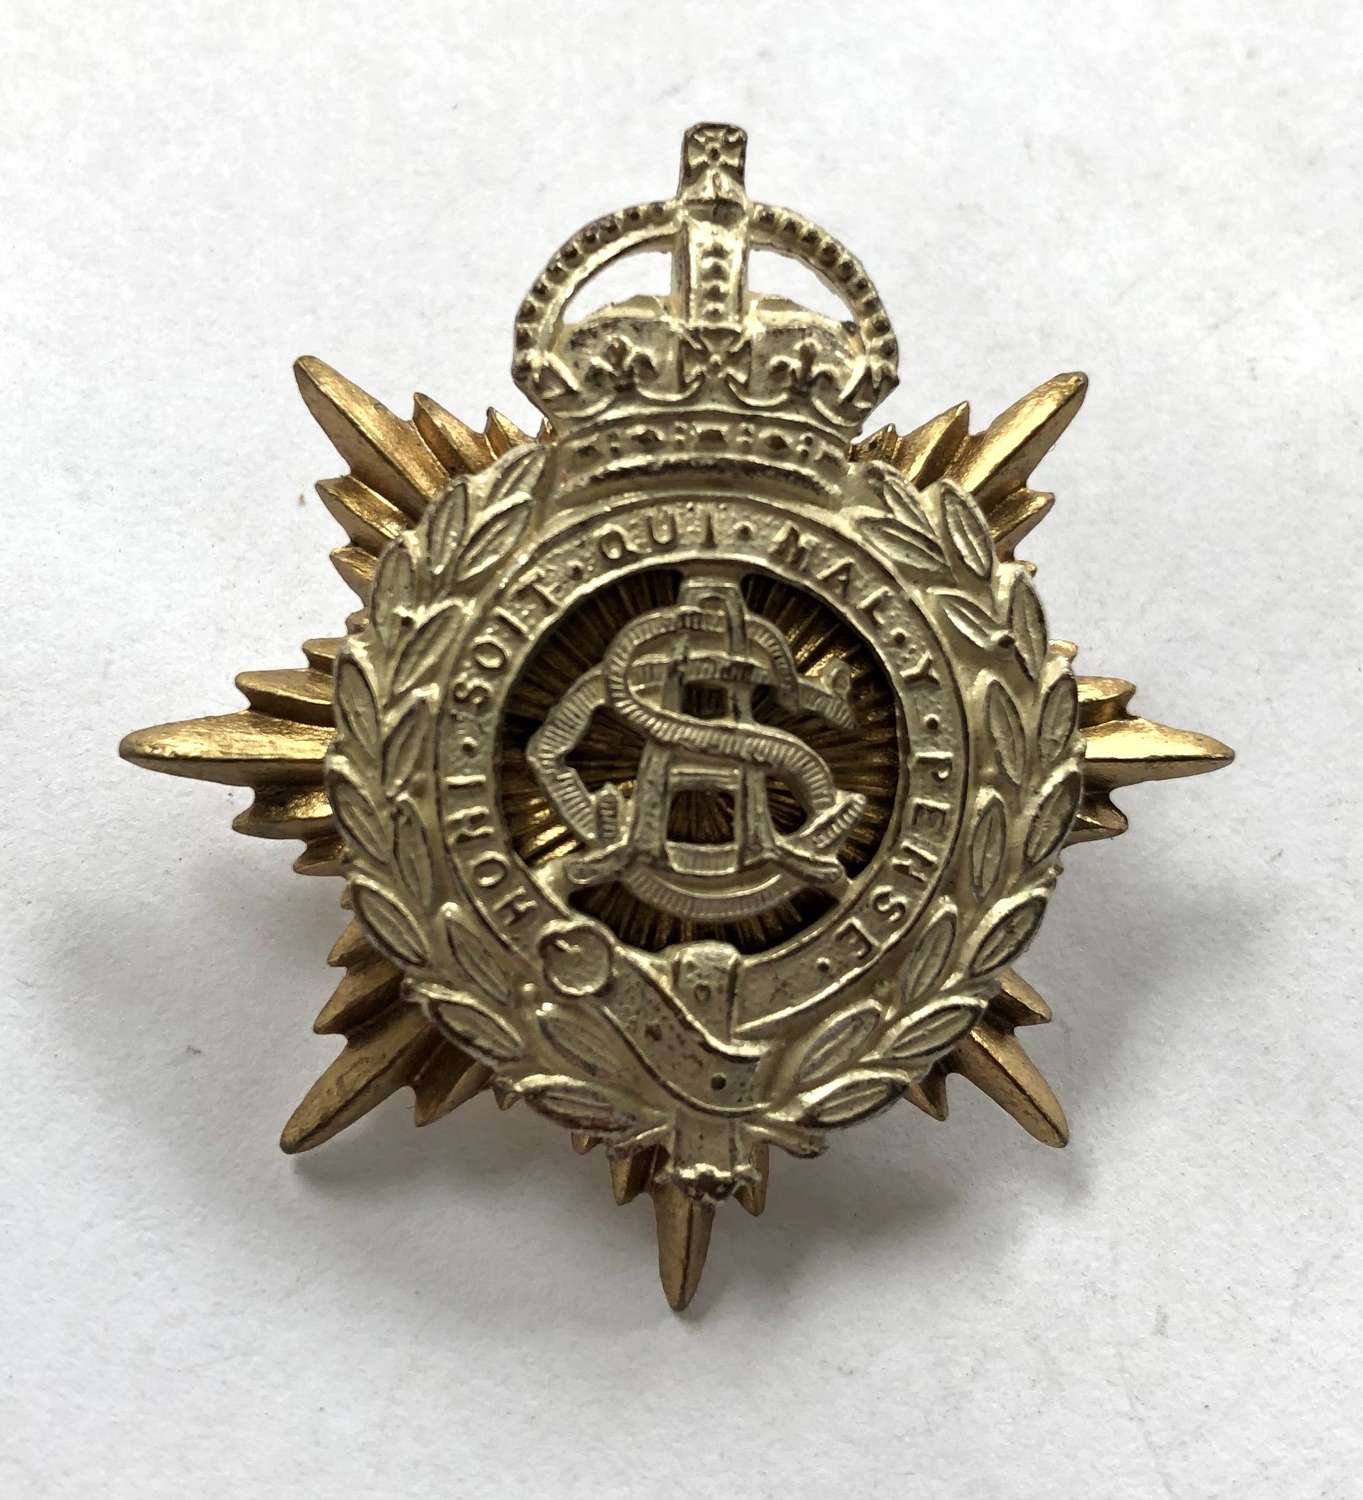 Army Service Corps early Edwardian Officer's cap badge circa 1902